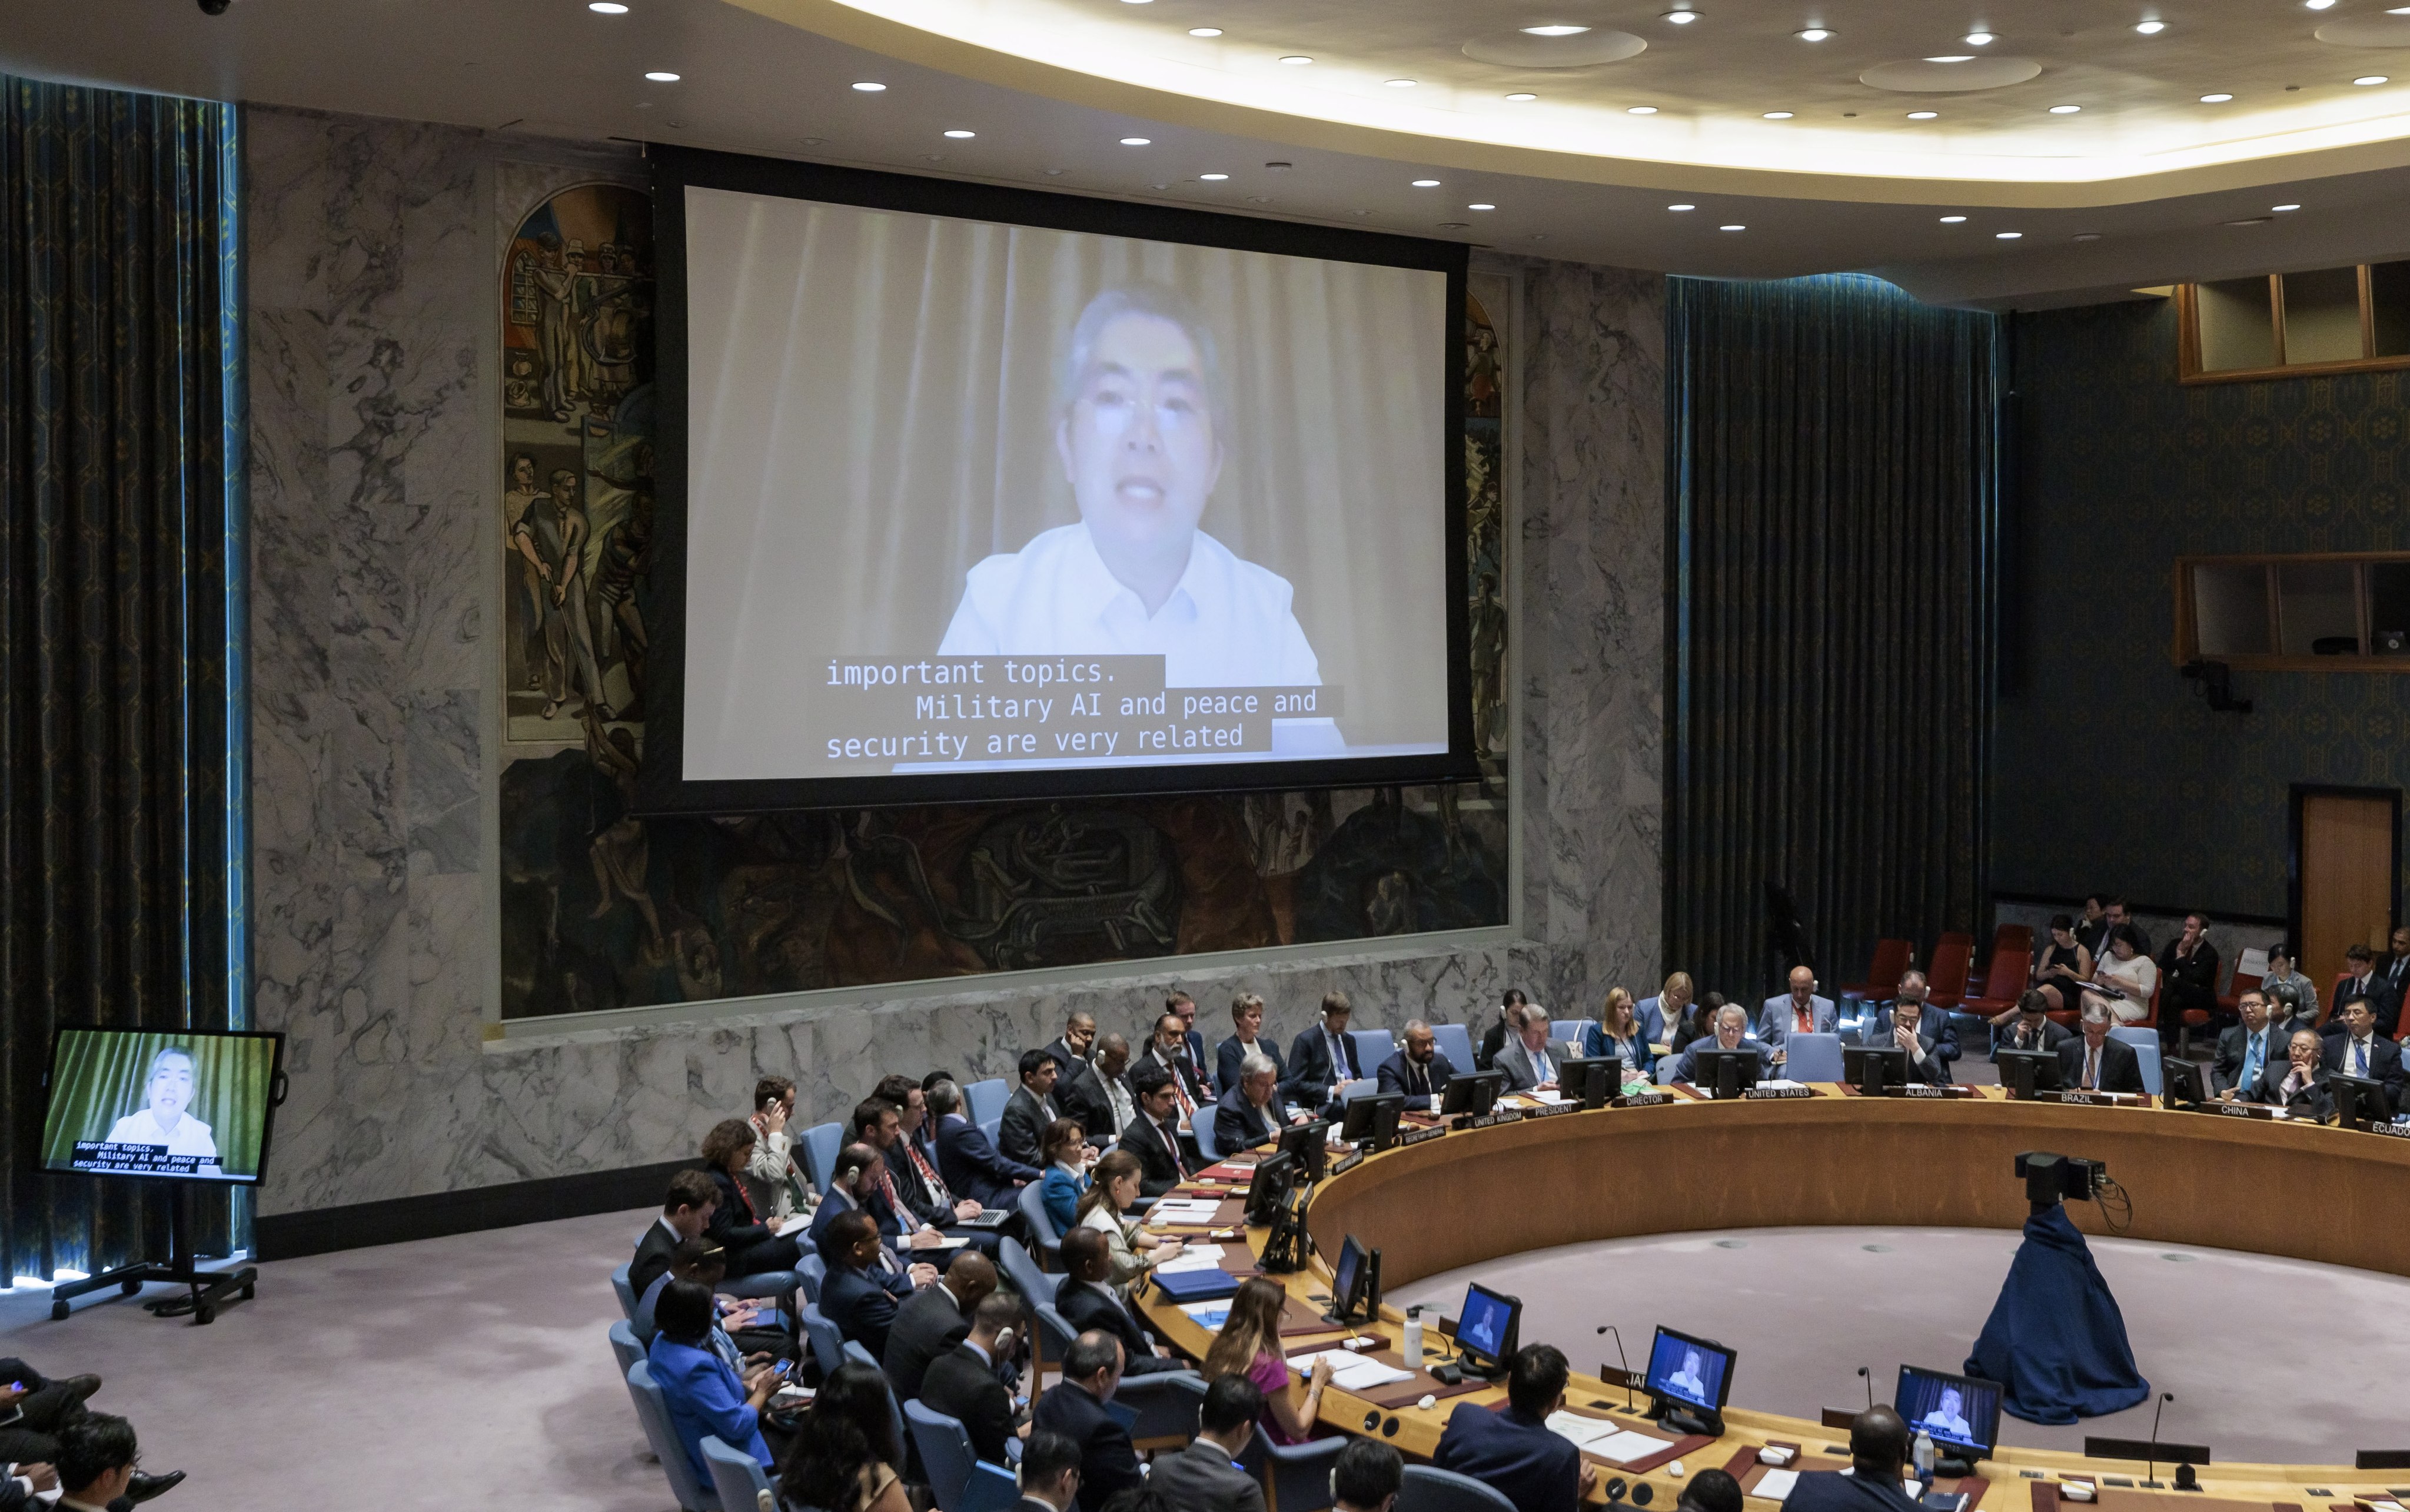 Professor Yi Zeng of The Alan Turing Institute is seen on a screen as he speaks during a United Nations Security Council meeting called to address the growing influence of artificial intelligence at United Nations headquarters in New York on July 18. Photo: EPA-EFE